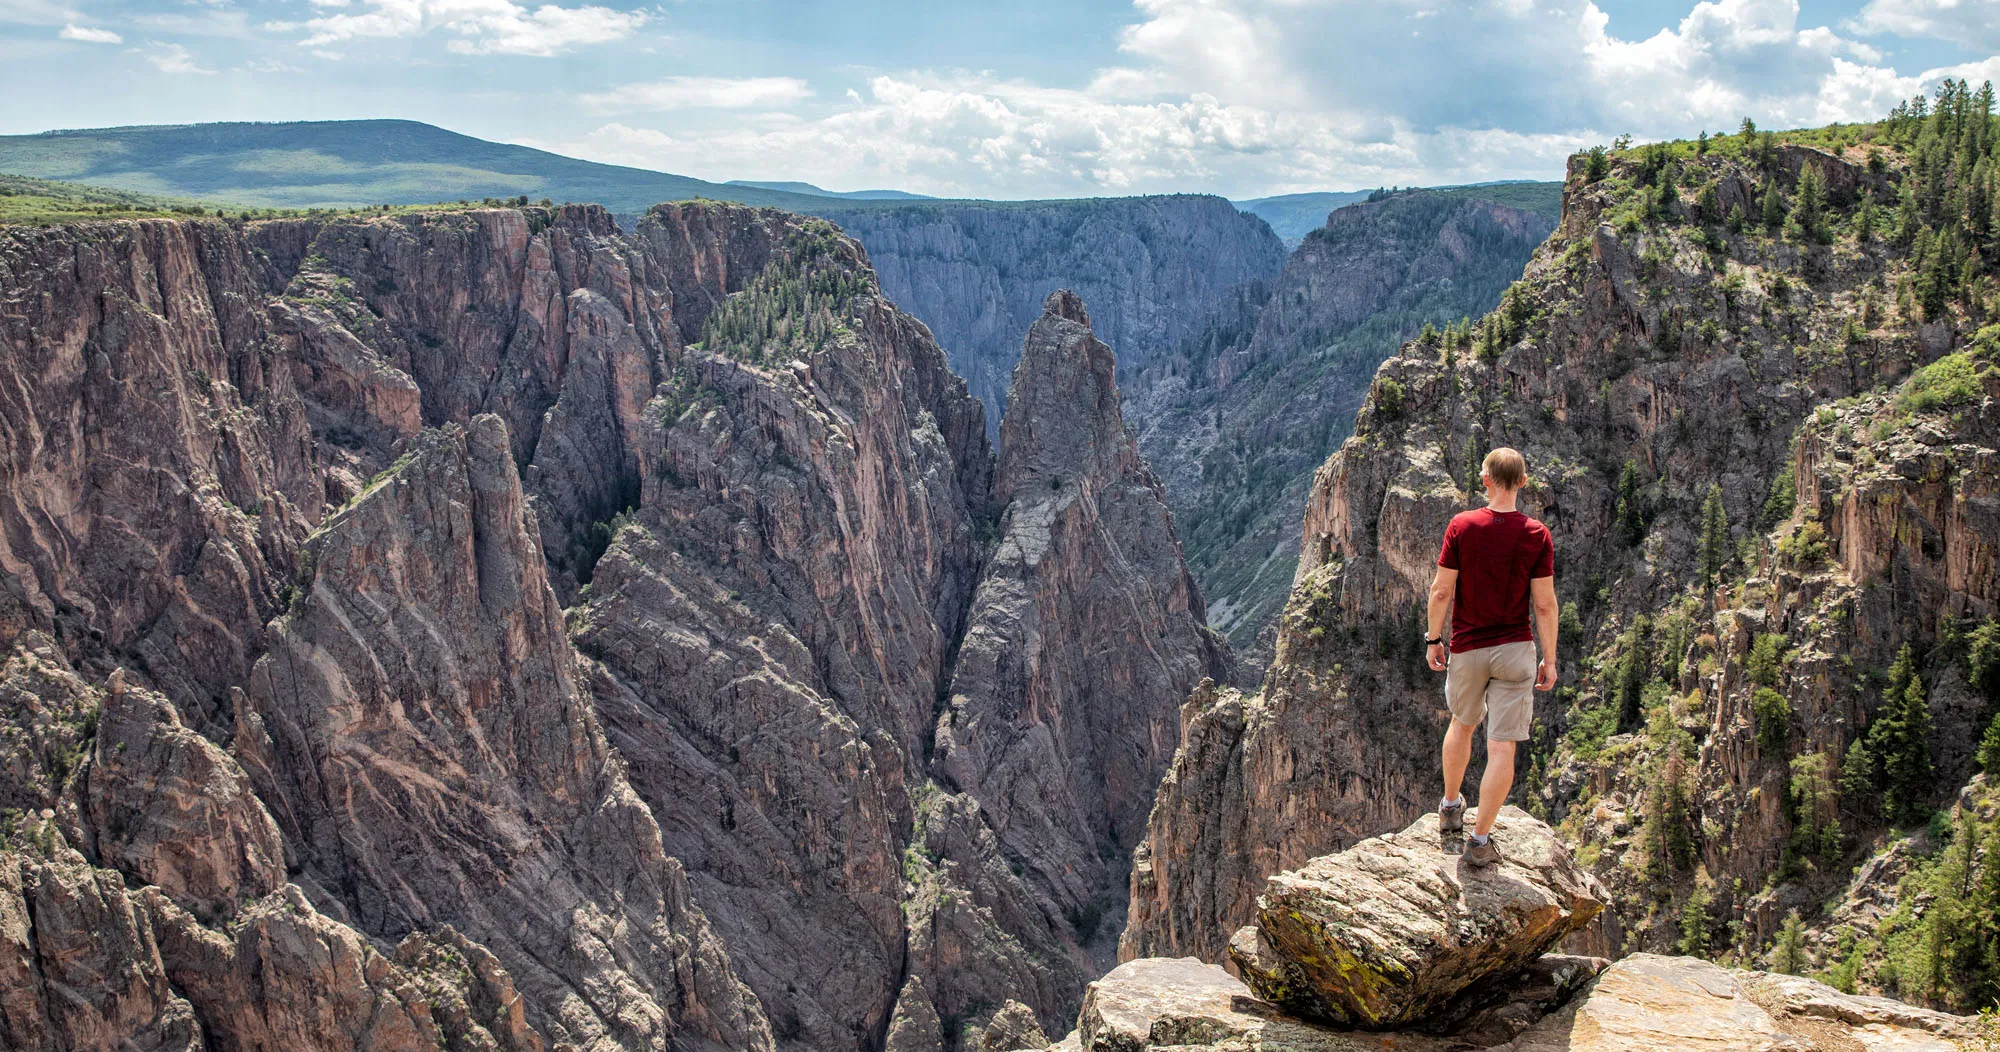 Featured image for “Complete Guide to South Rim Drive Road, Black Canyon of the Gunnison”